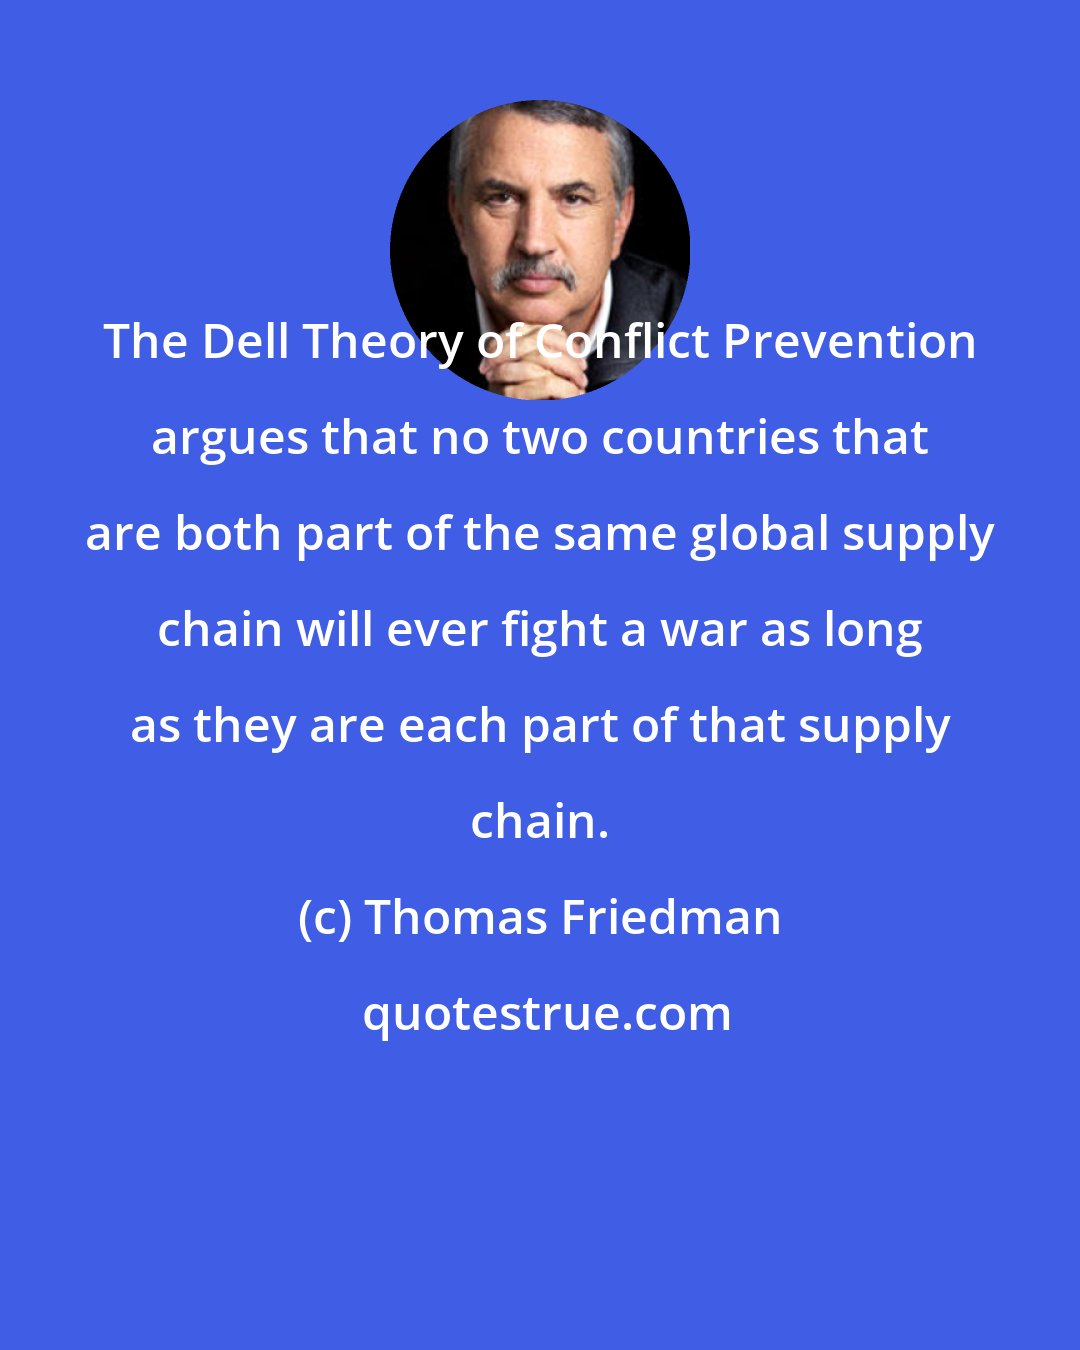 Thomas Friedman: The Dell Theory of Conflict Prevention argues that no two countries that are both part of the same global supply chain will ever fight a war as long as they are each part of that supply chain.